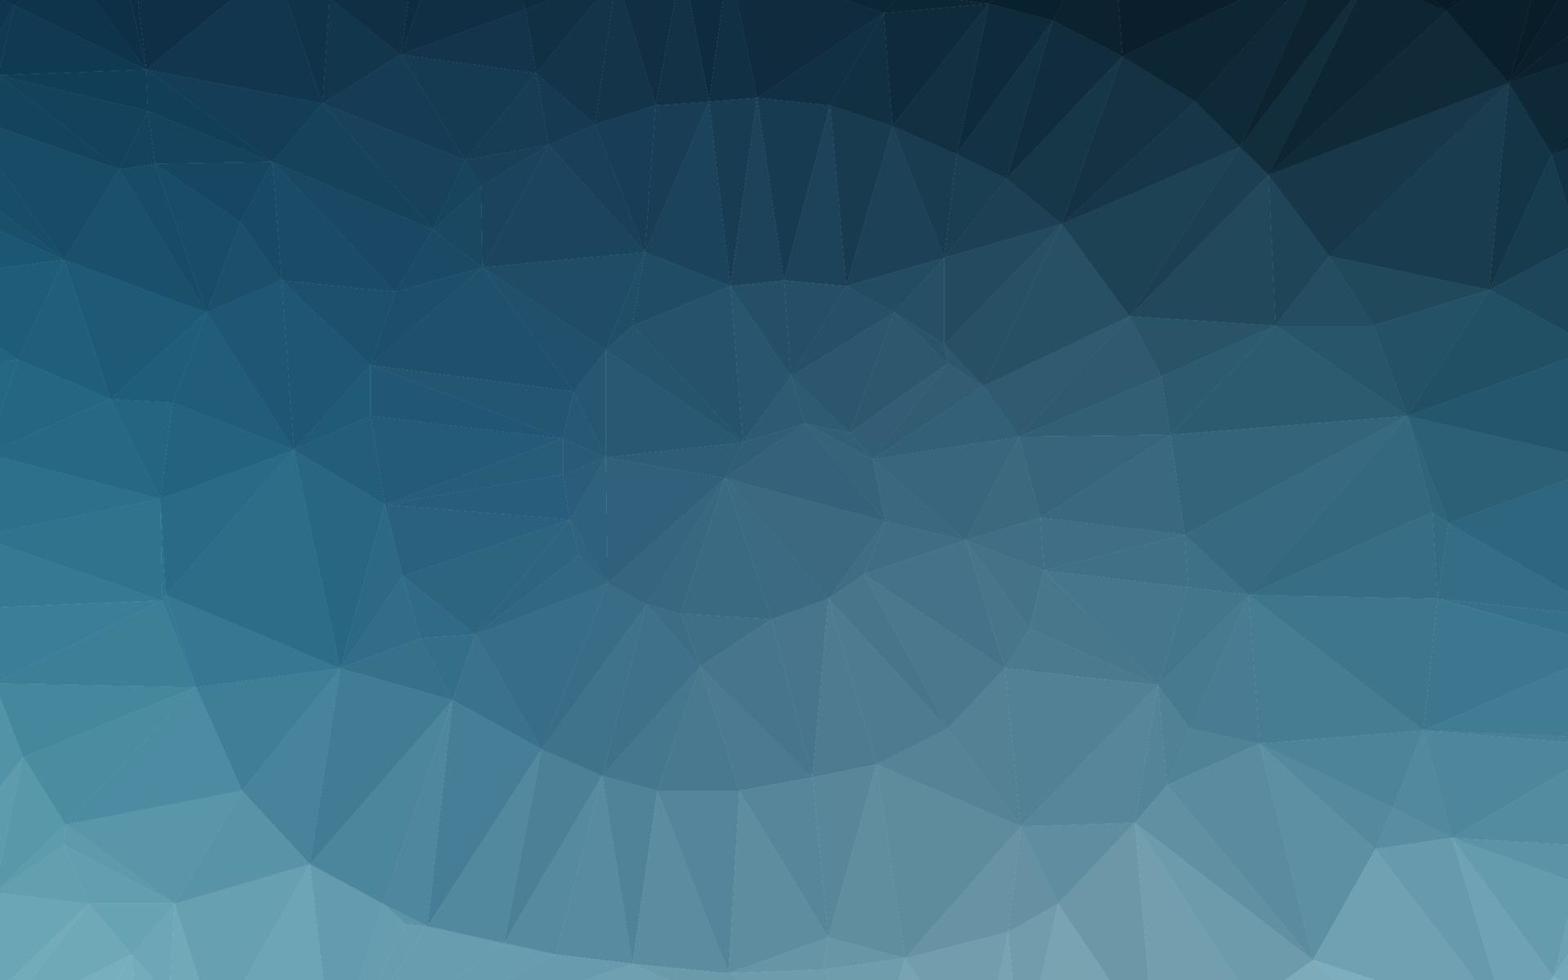 Light BLUE vector abstract mosaic background.